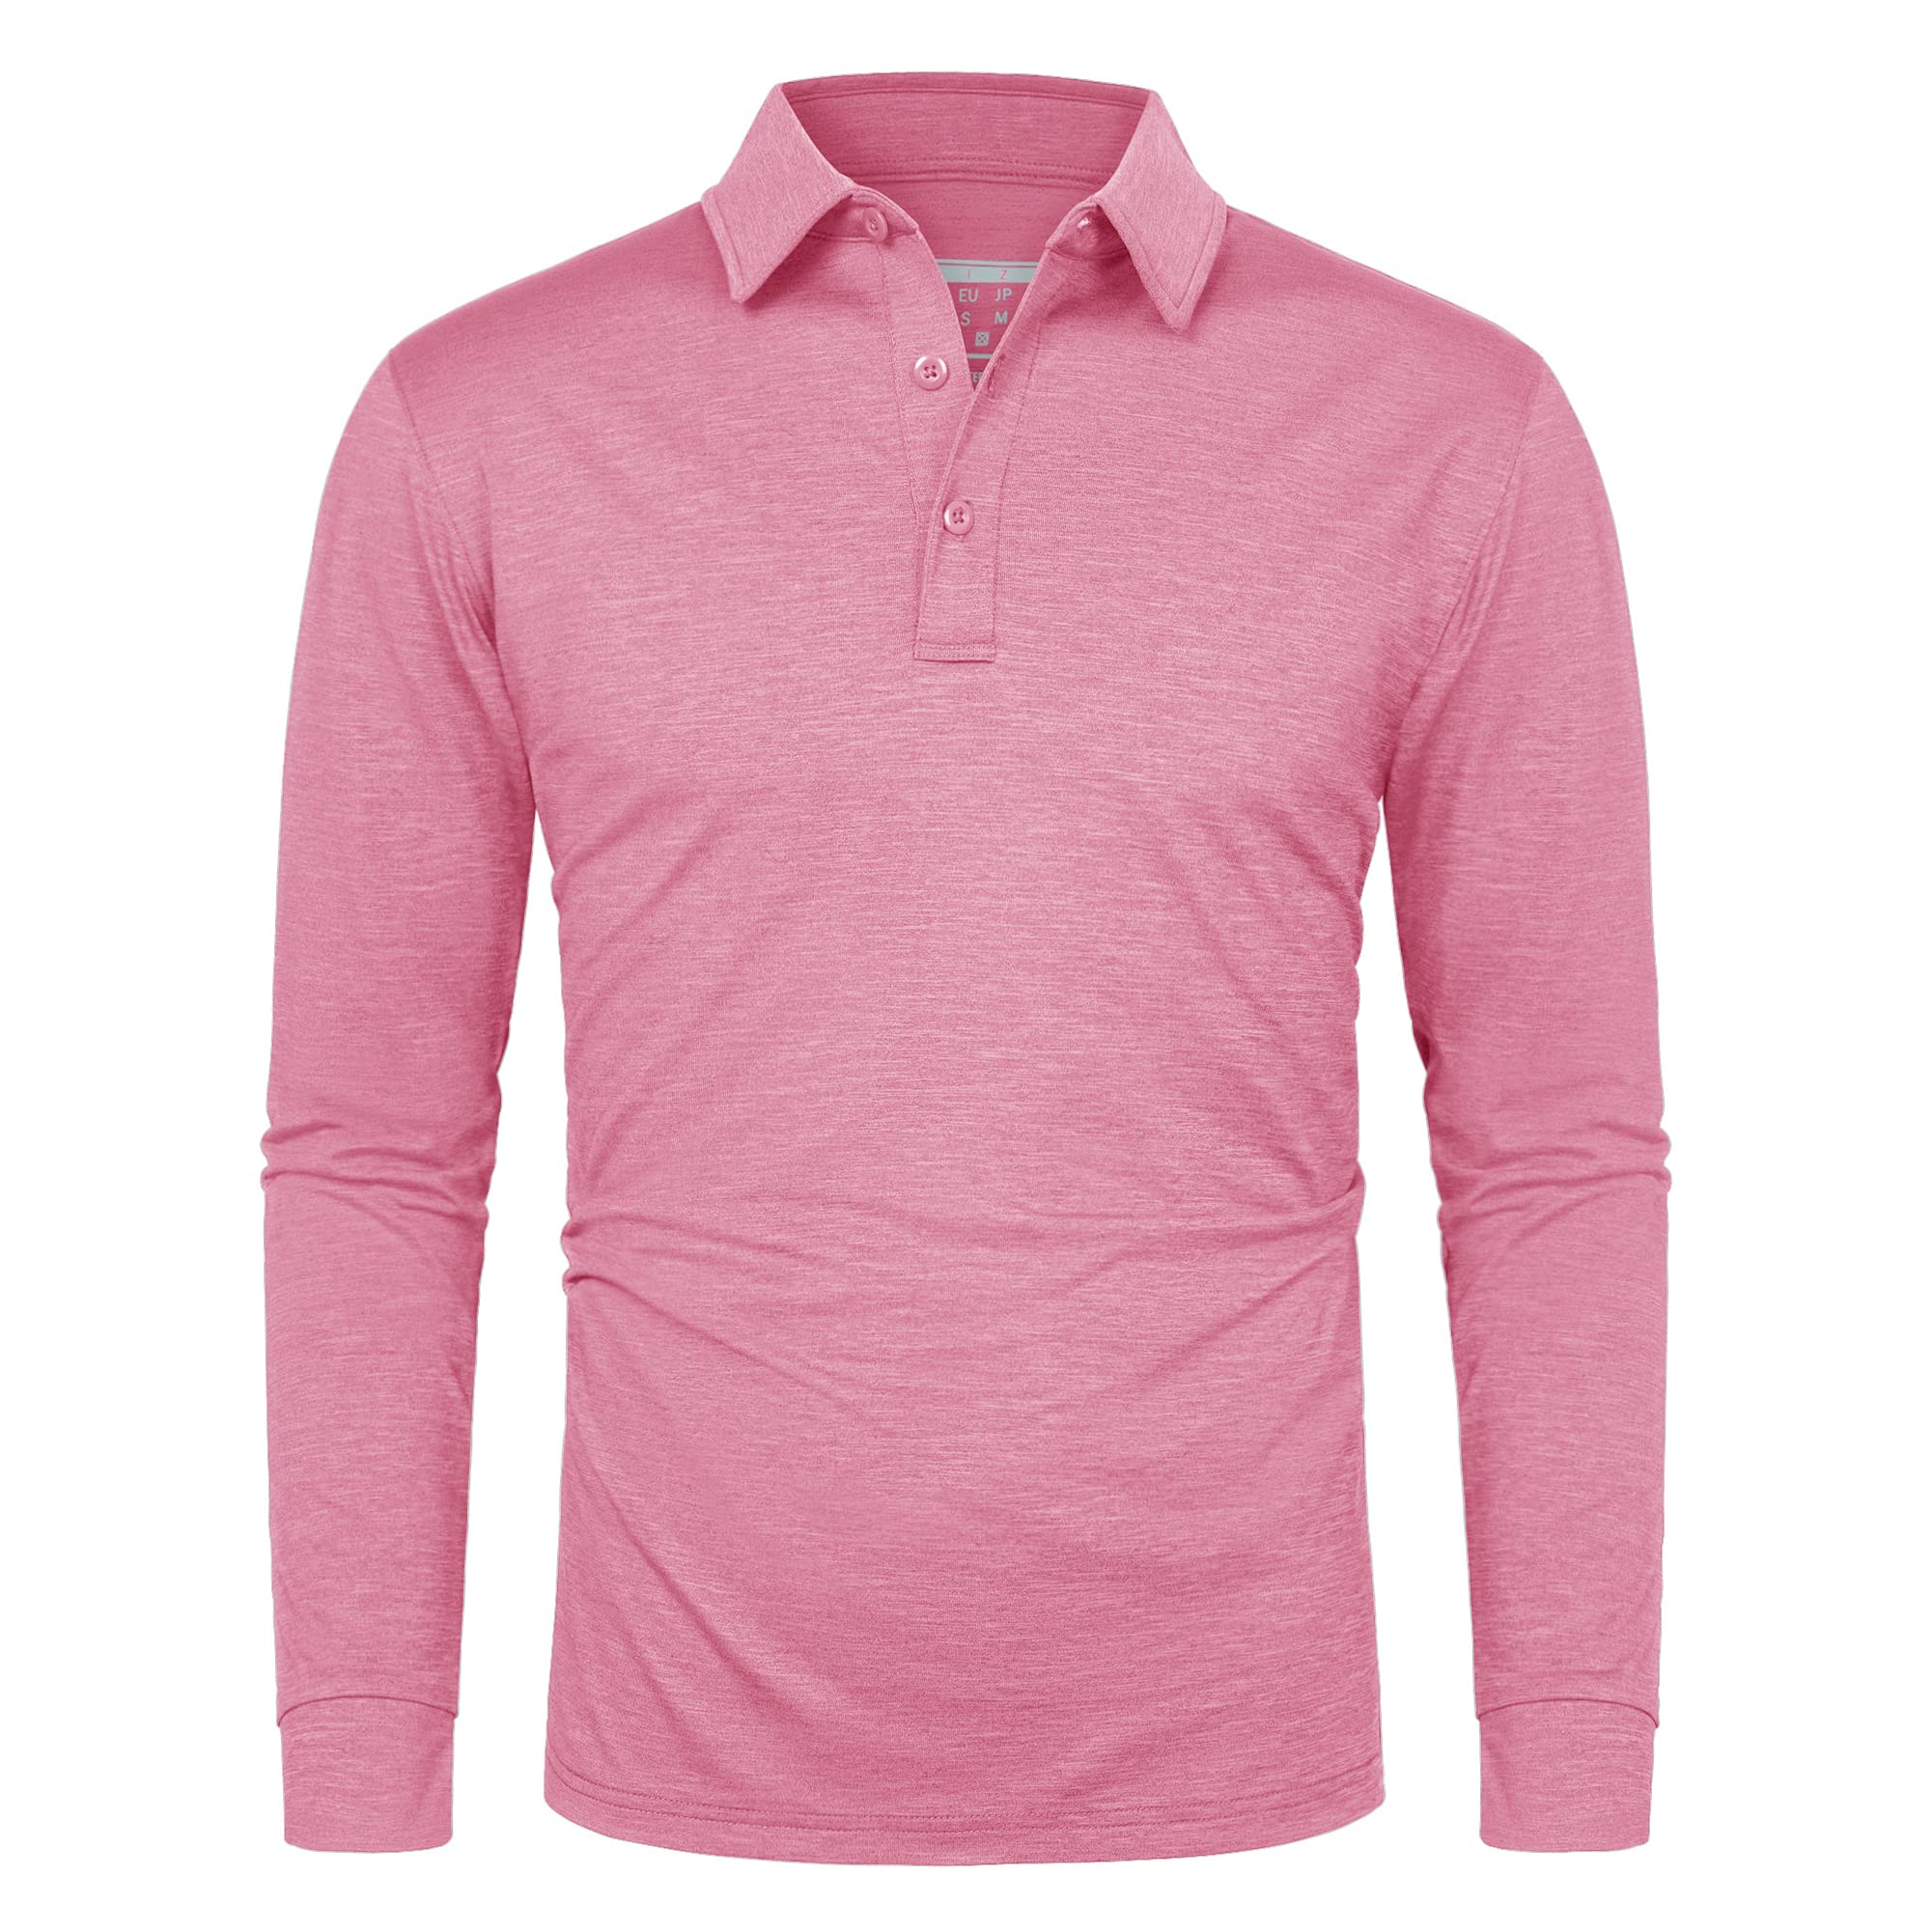 Soft Polyester Golf Polo Long Sleeve Shirt in pink